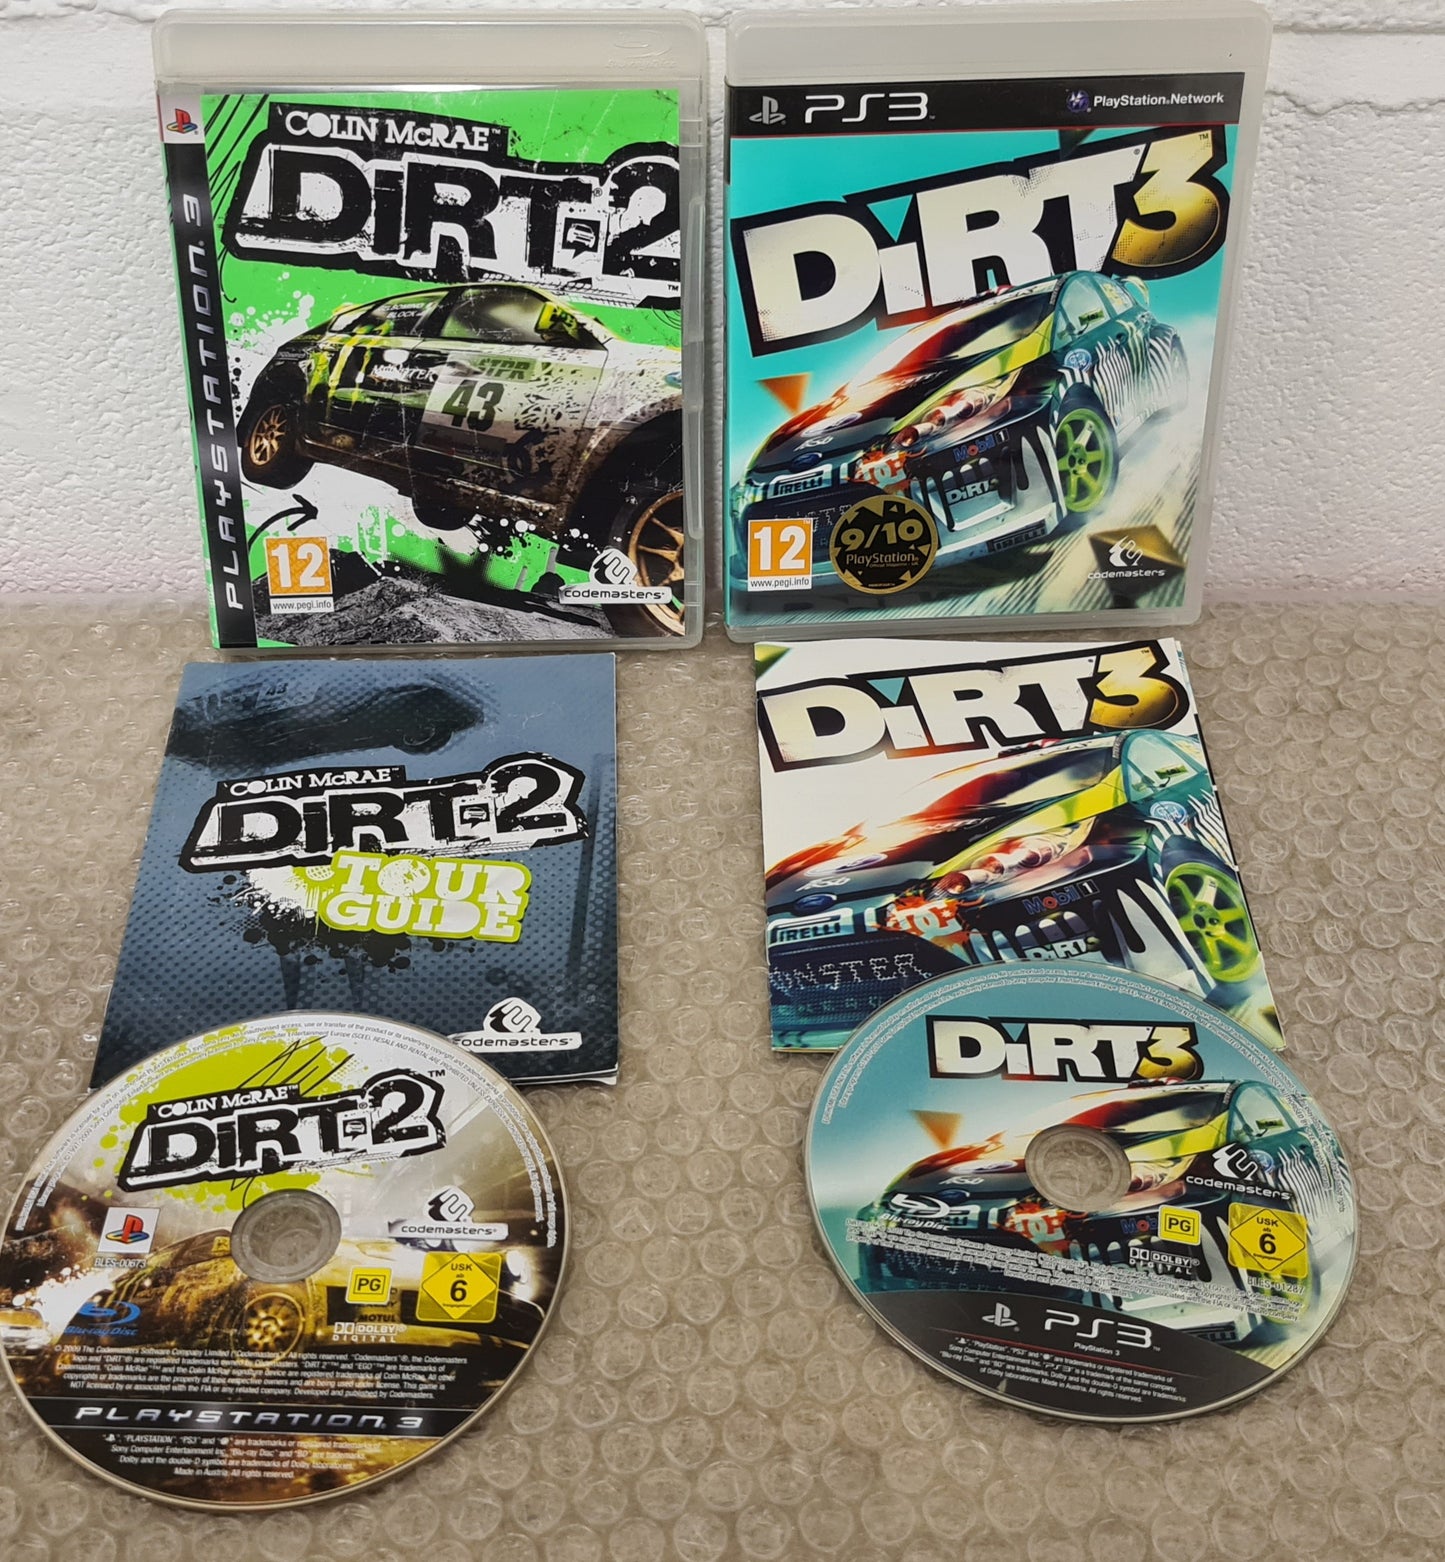 Colin McRae Dirt 2 & 3 Sony Playstation 3 (PS3) Game Bundle